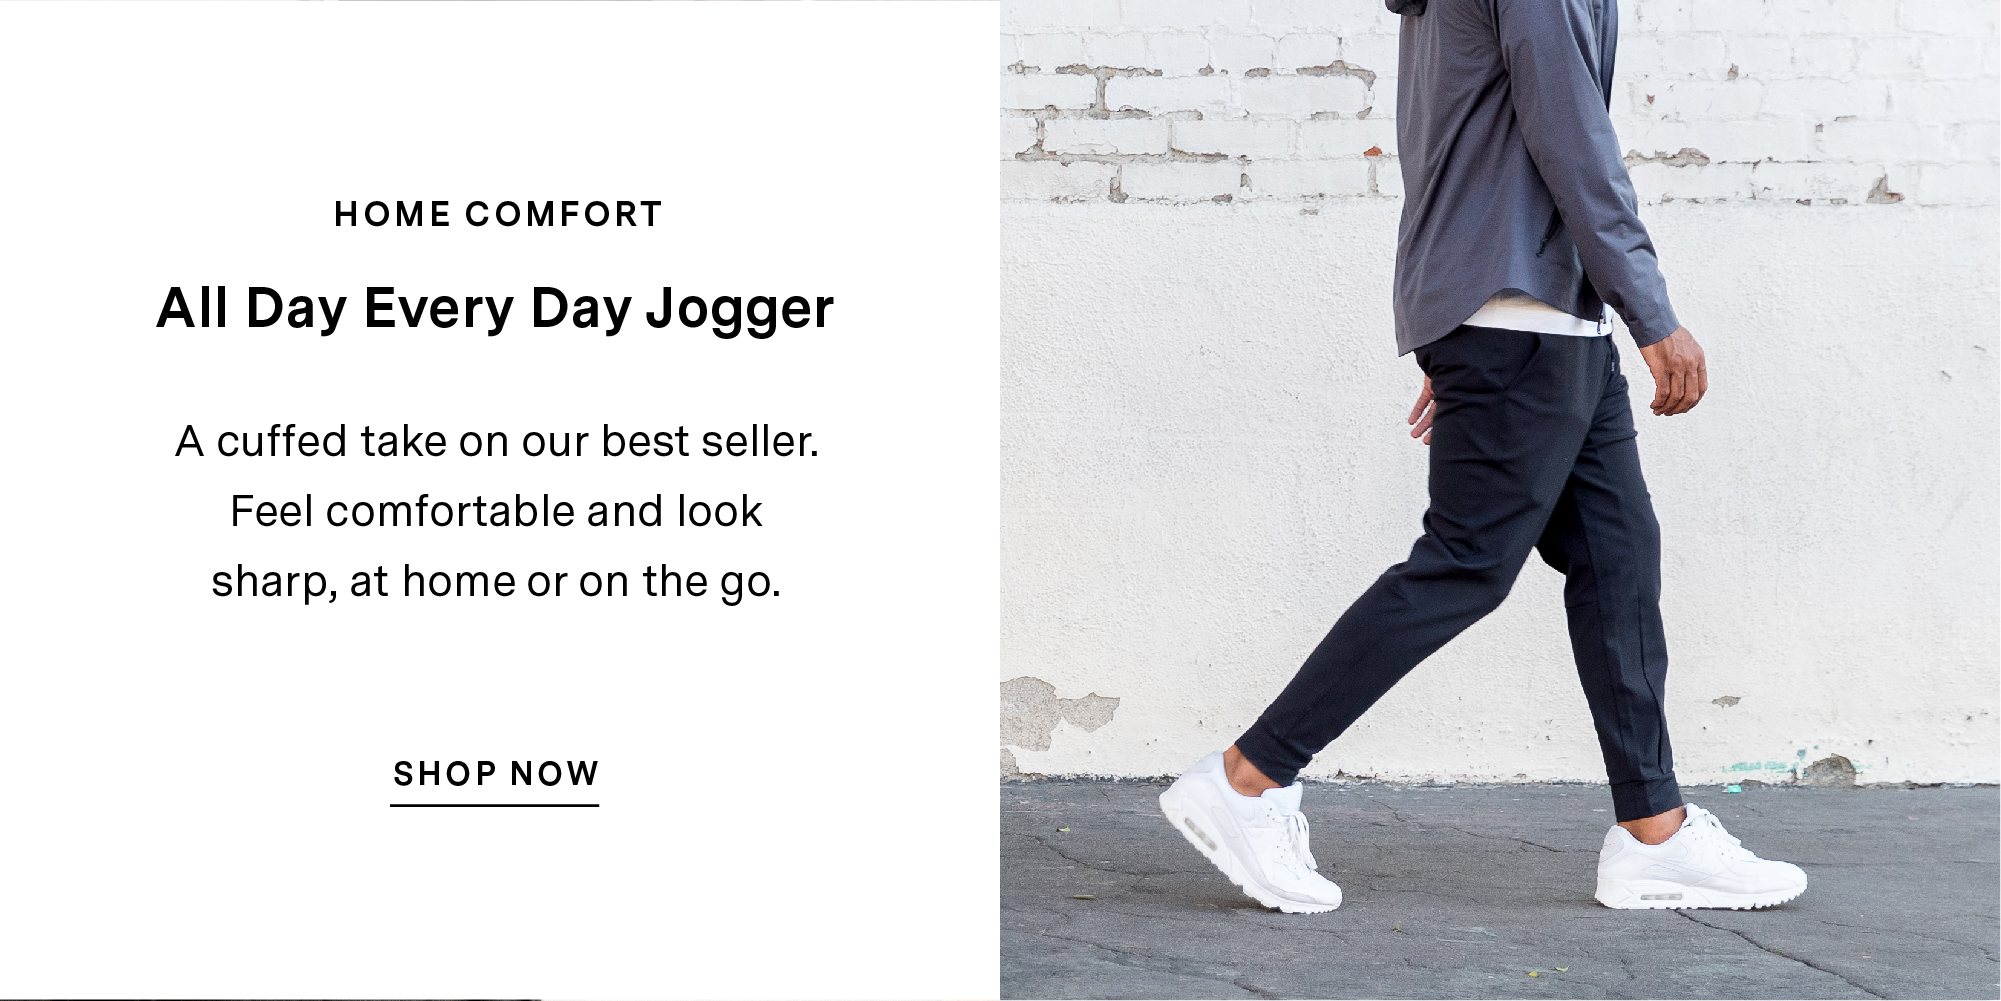 HOME COMFORT. All Day Every Day Jogger. A cuffed take on our best seller. Feel comfortable and look sharp, at home or on the go. SHOP NOW